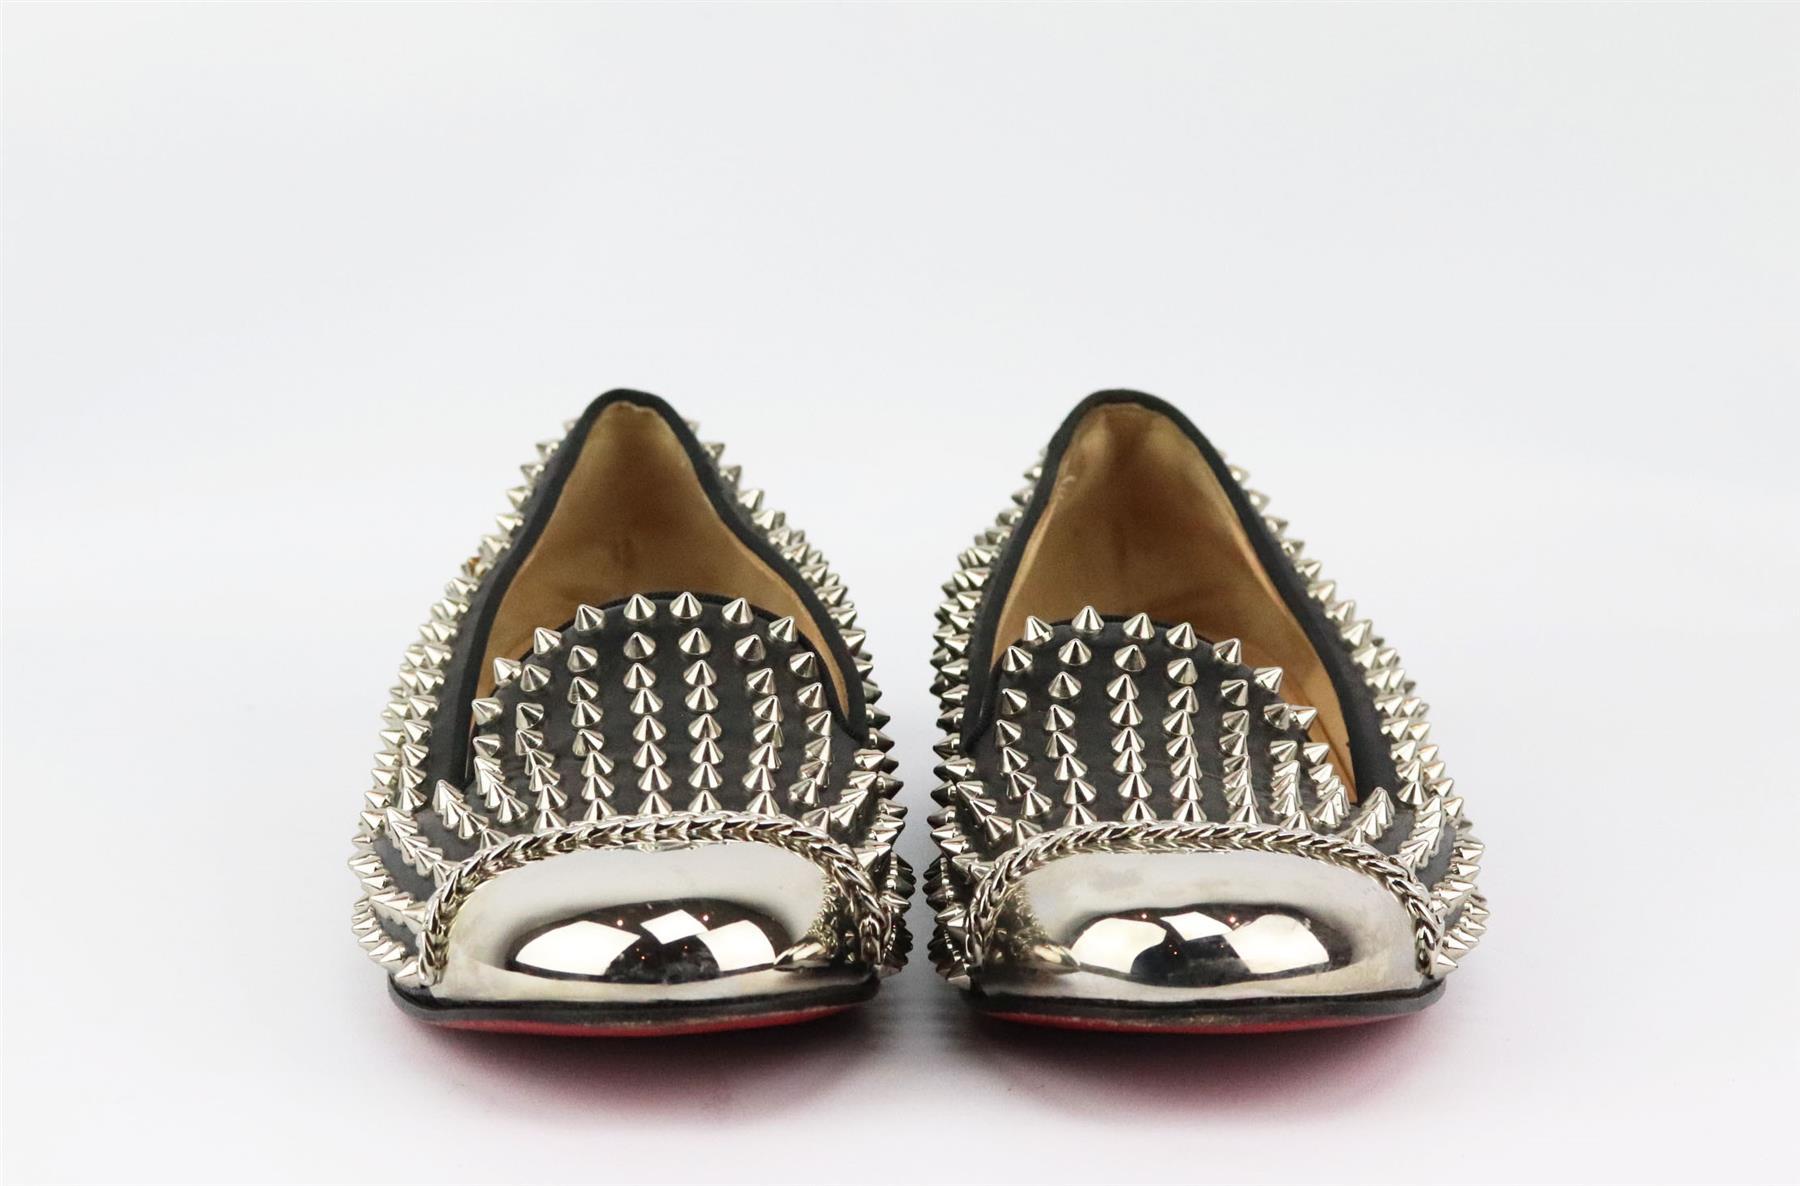 These loafers by Christian Louboutin are a glamorous approach to rock cool with spiked leather slippers which are a fresh update on the look, capped with silver metal, this tough-luxe pair will seal casual outfits with standout status. Heel measures